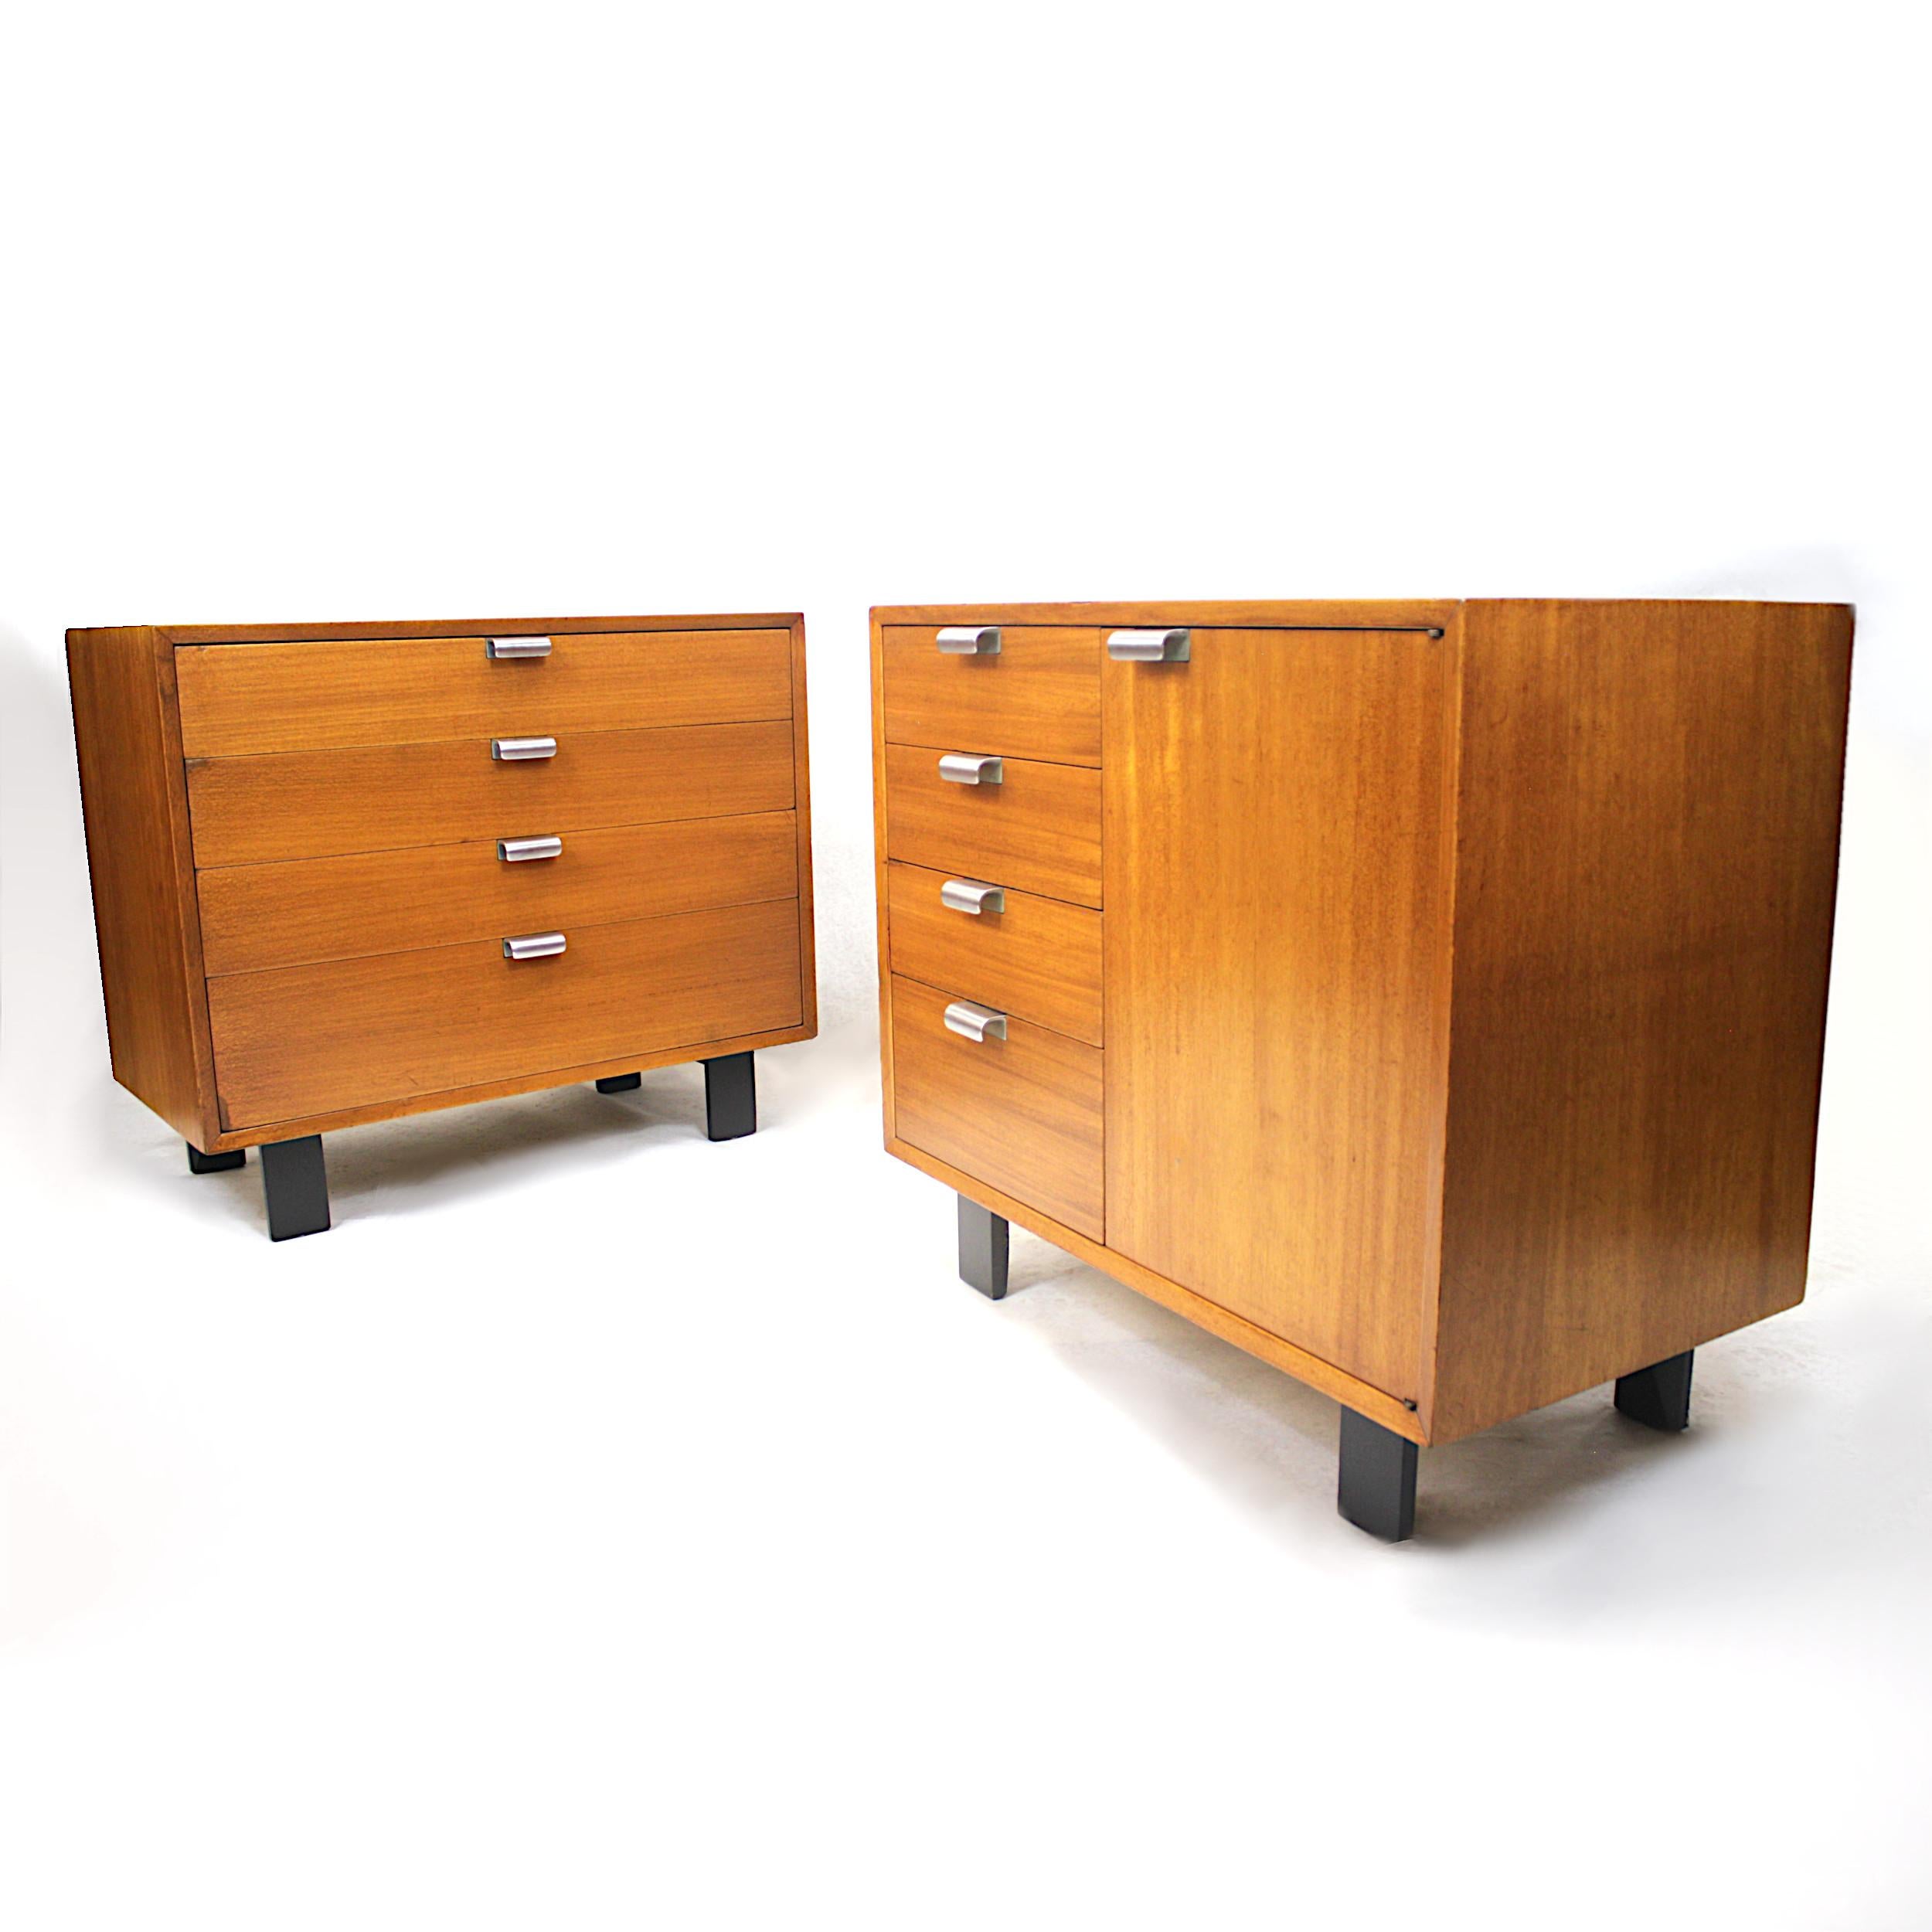 This is a wonderful pair of 1950s Mid-Century Modern cabinets designed by George Nelson for Herman Miller as part of the Basic Cabinet Series (BCS). These beauties are fresh off a full face-lift that has melted the years away while retaining some of